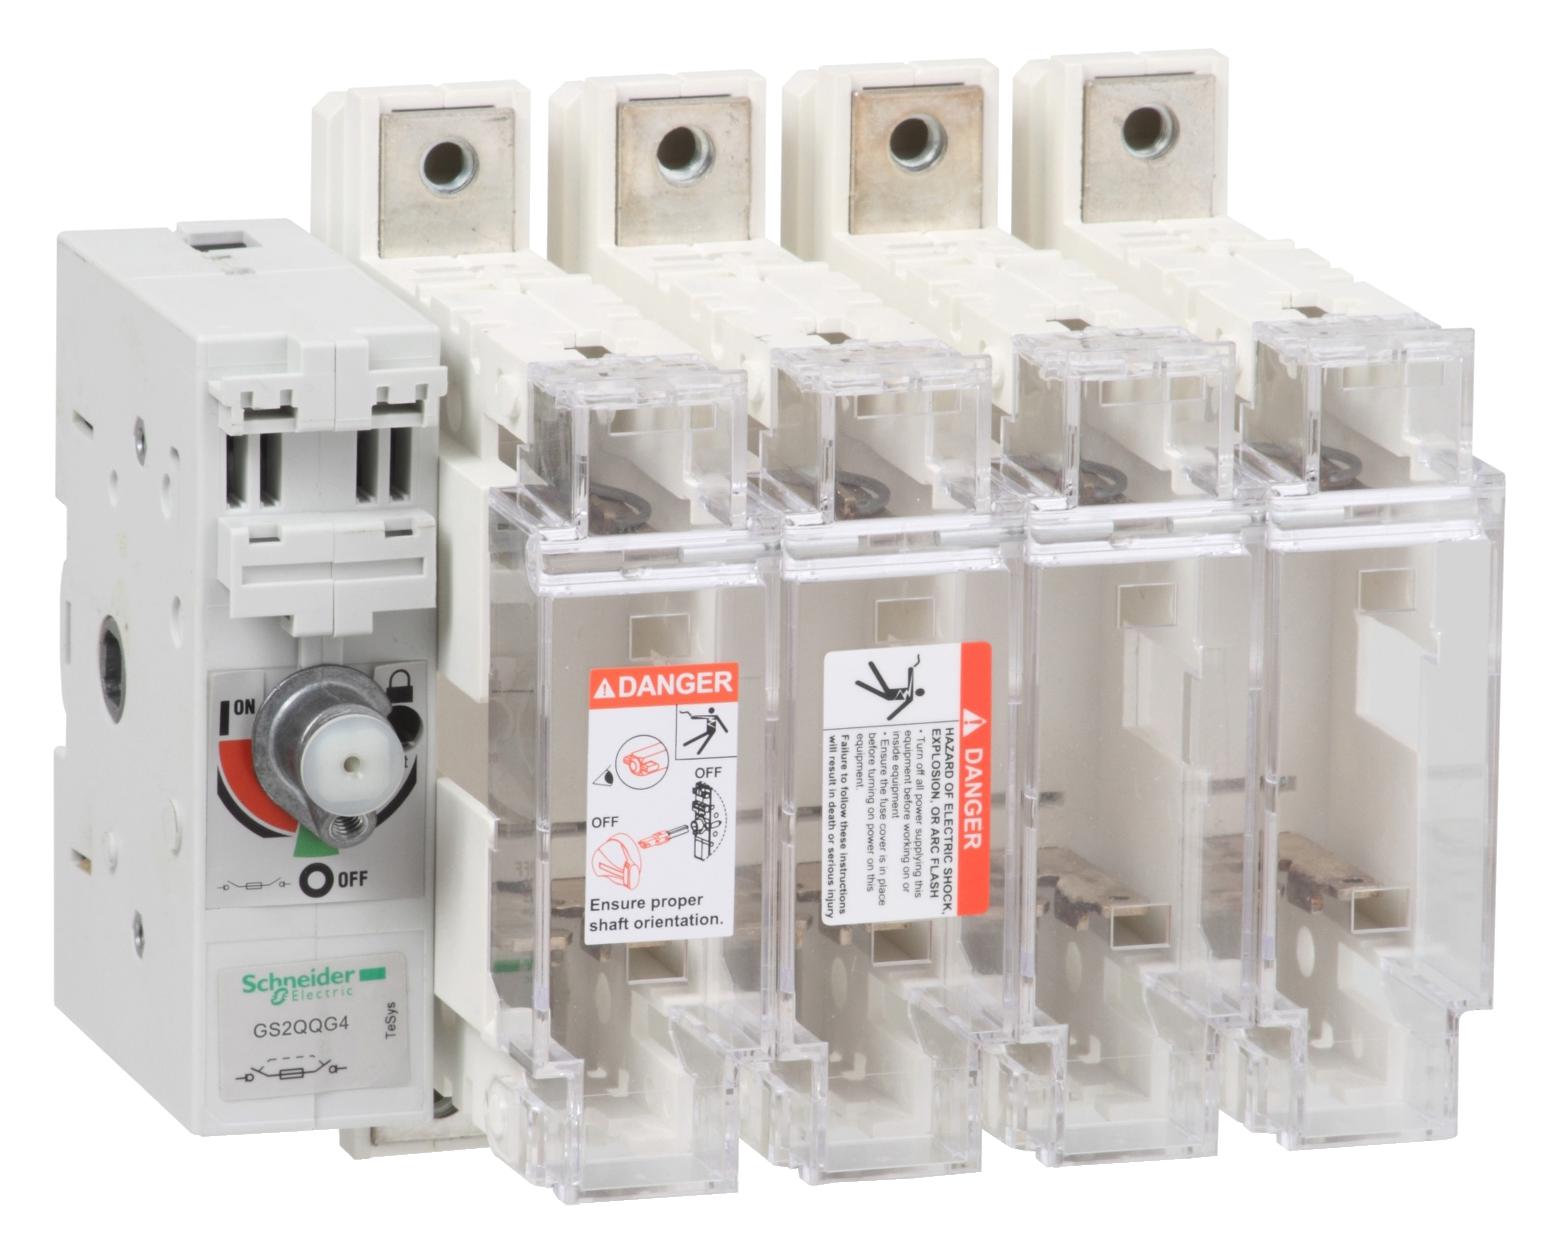 SCHNEIDER ELECTRIC Fused GS2QQG4 FUSE DISCONNECT SW. 4X 400A 2 SCHNEIDER ELECTRIC 3406298 GS2QQG4